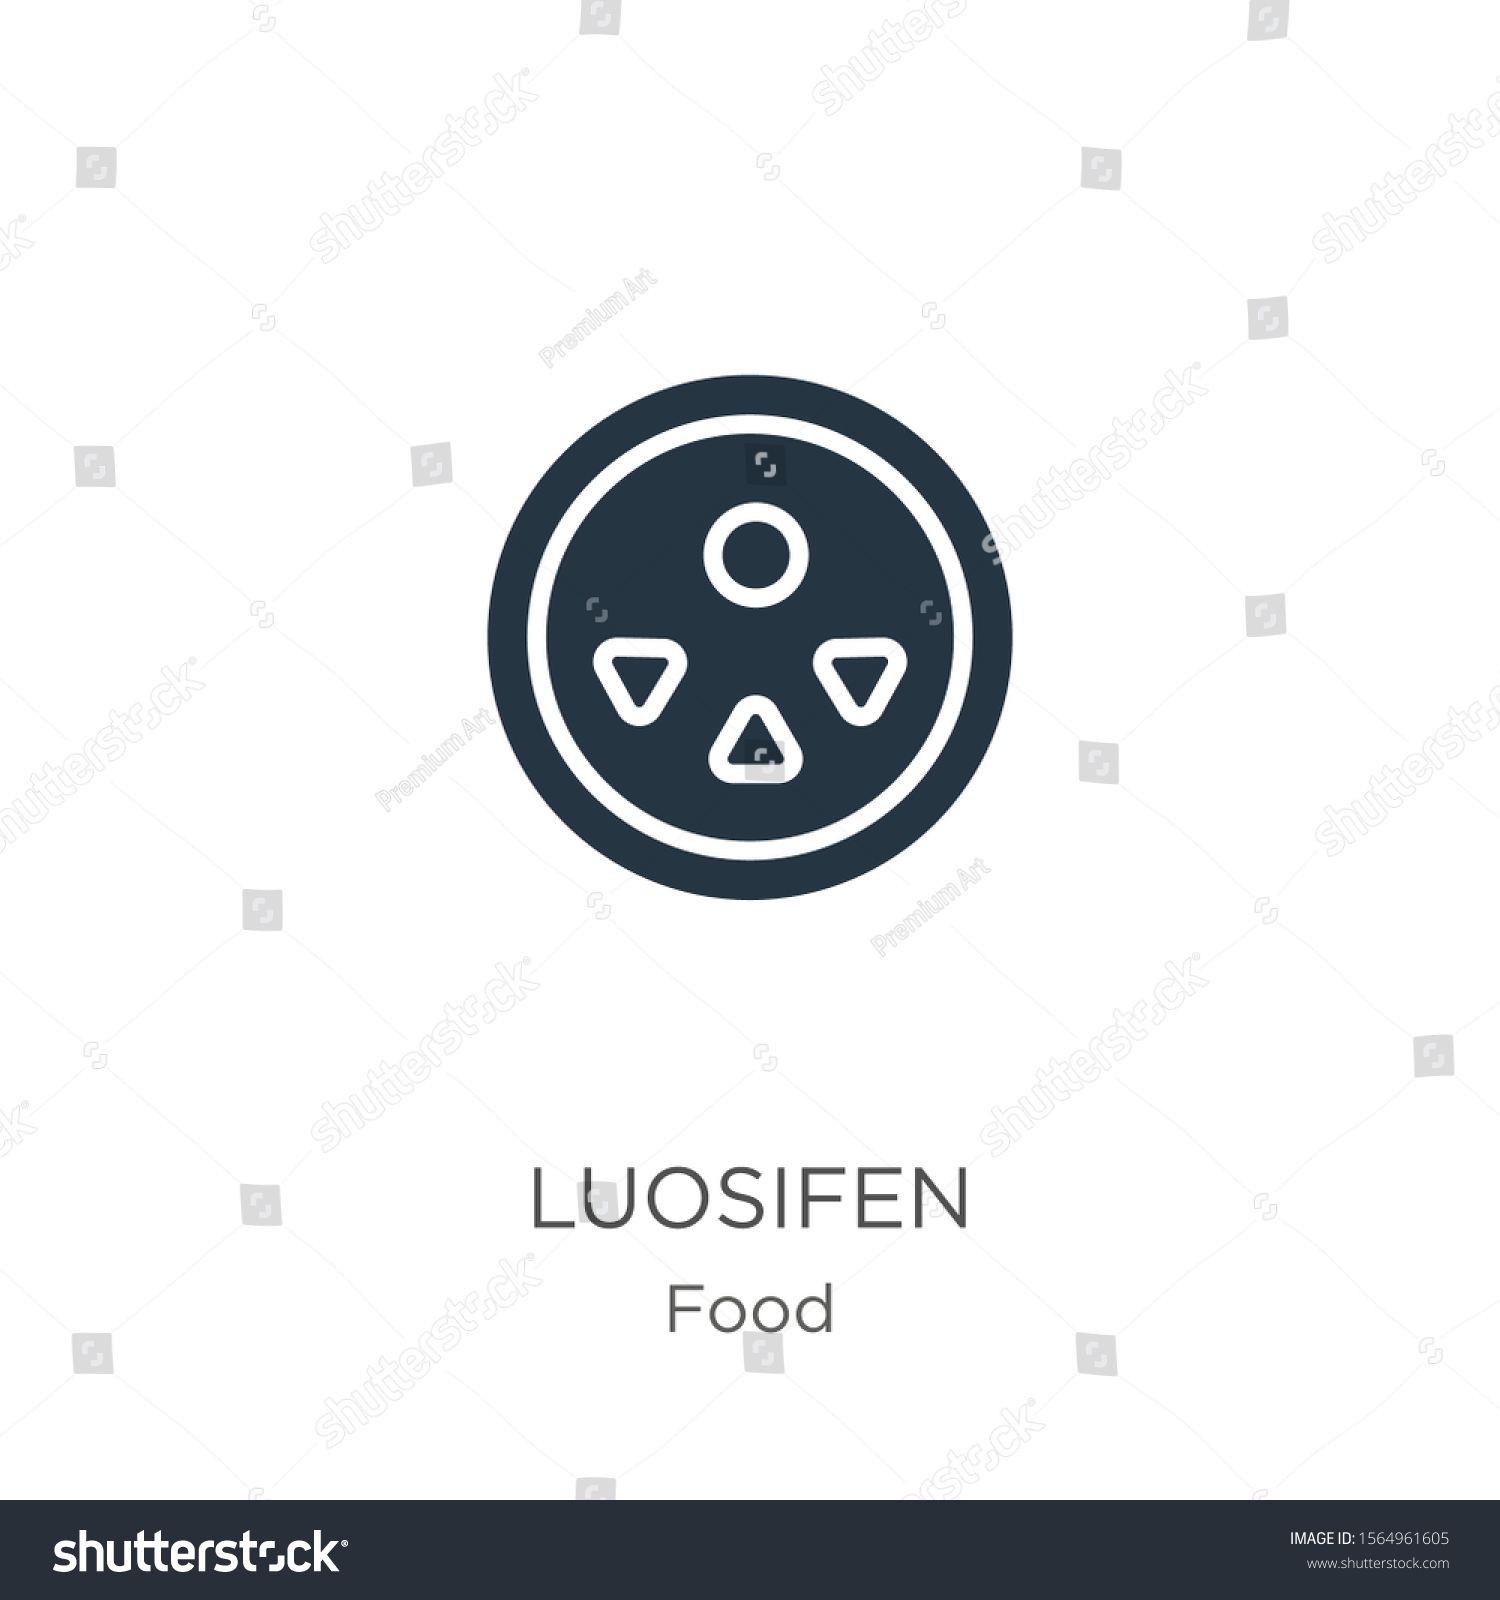 SVG of Luosifen icon vector. Trendy flat luosifen icon from food collection isolated on white background. Vector illustration can be used for web and mobile graphic design, logo, eps10 svg